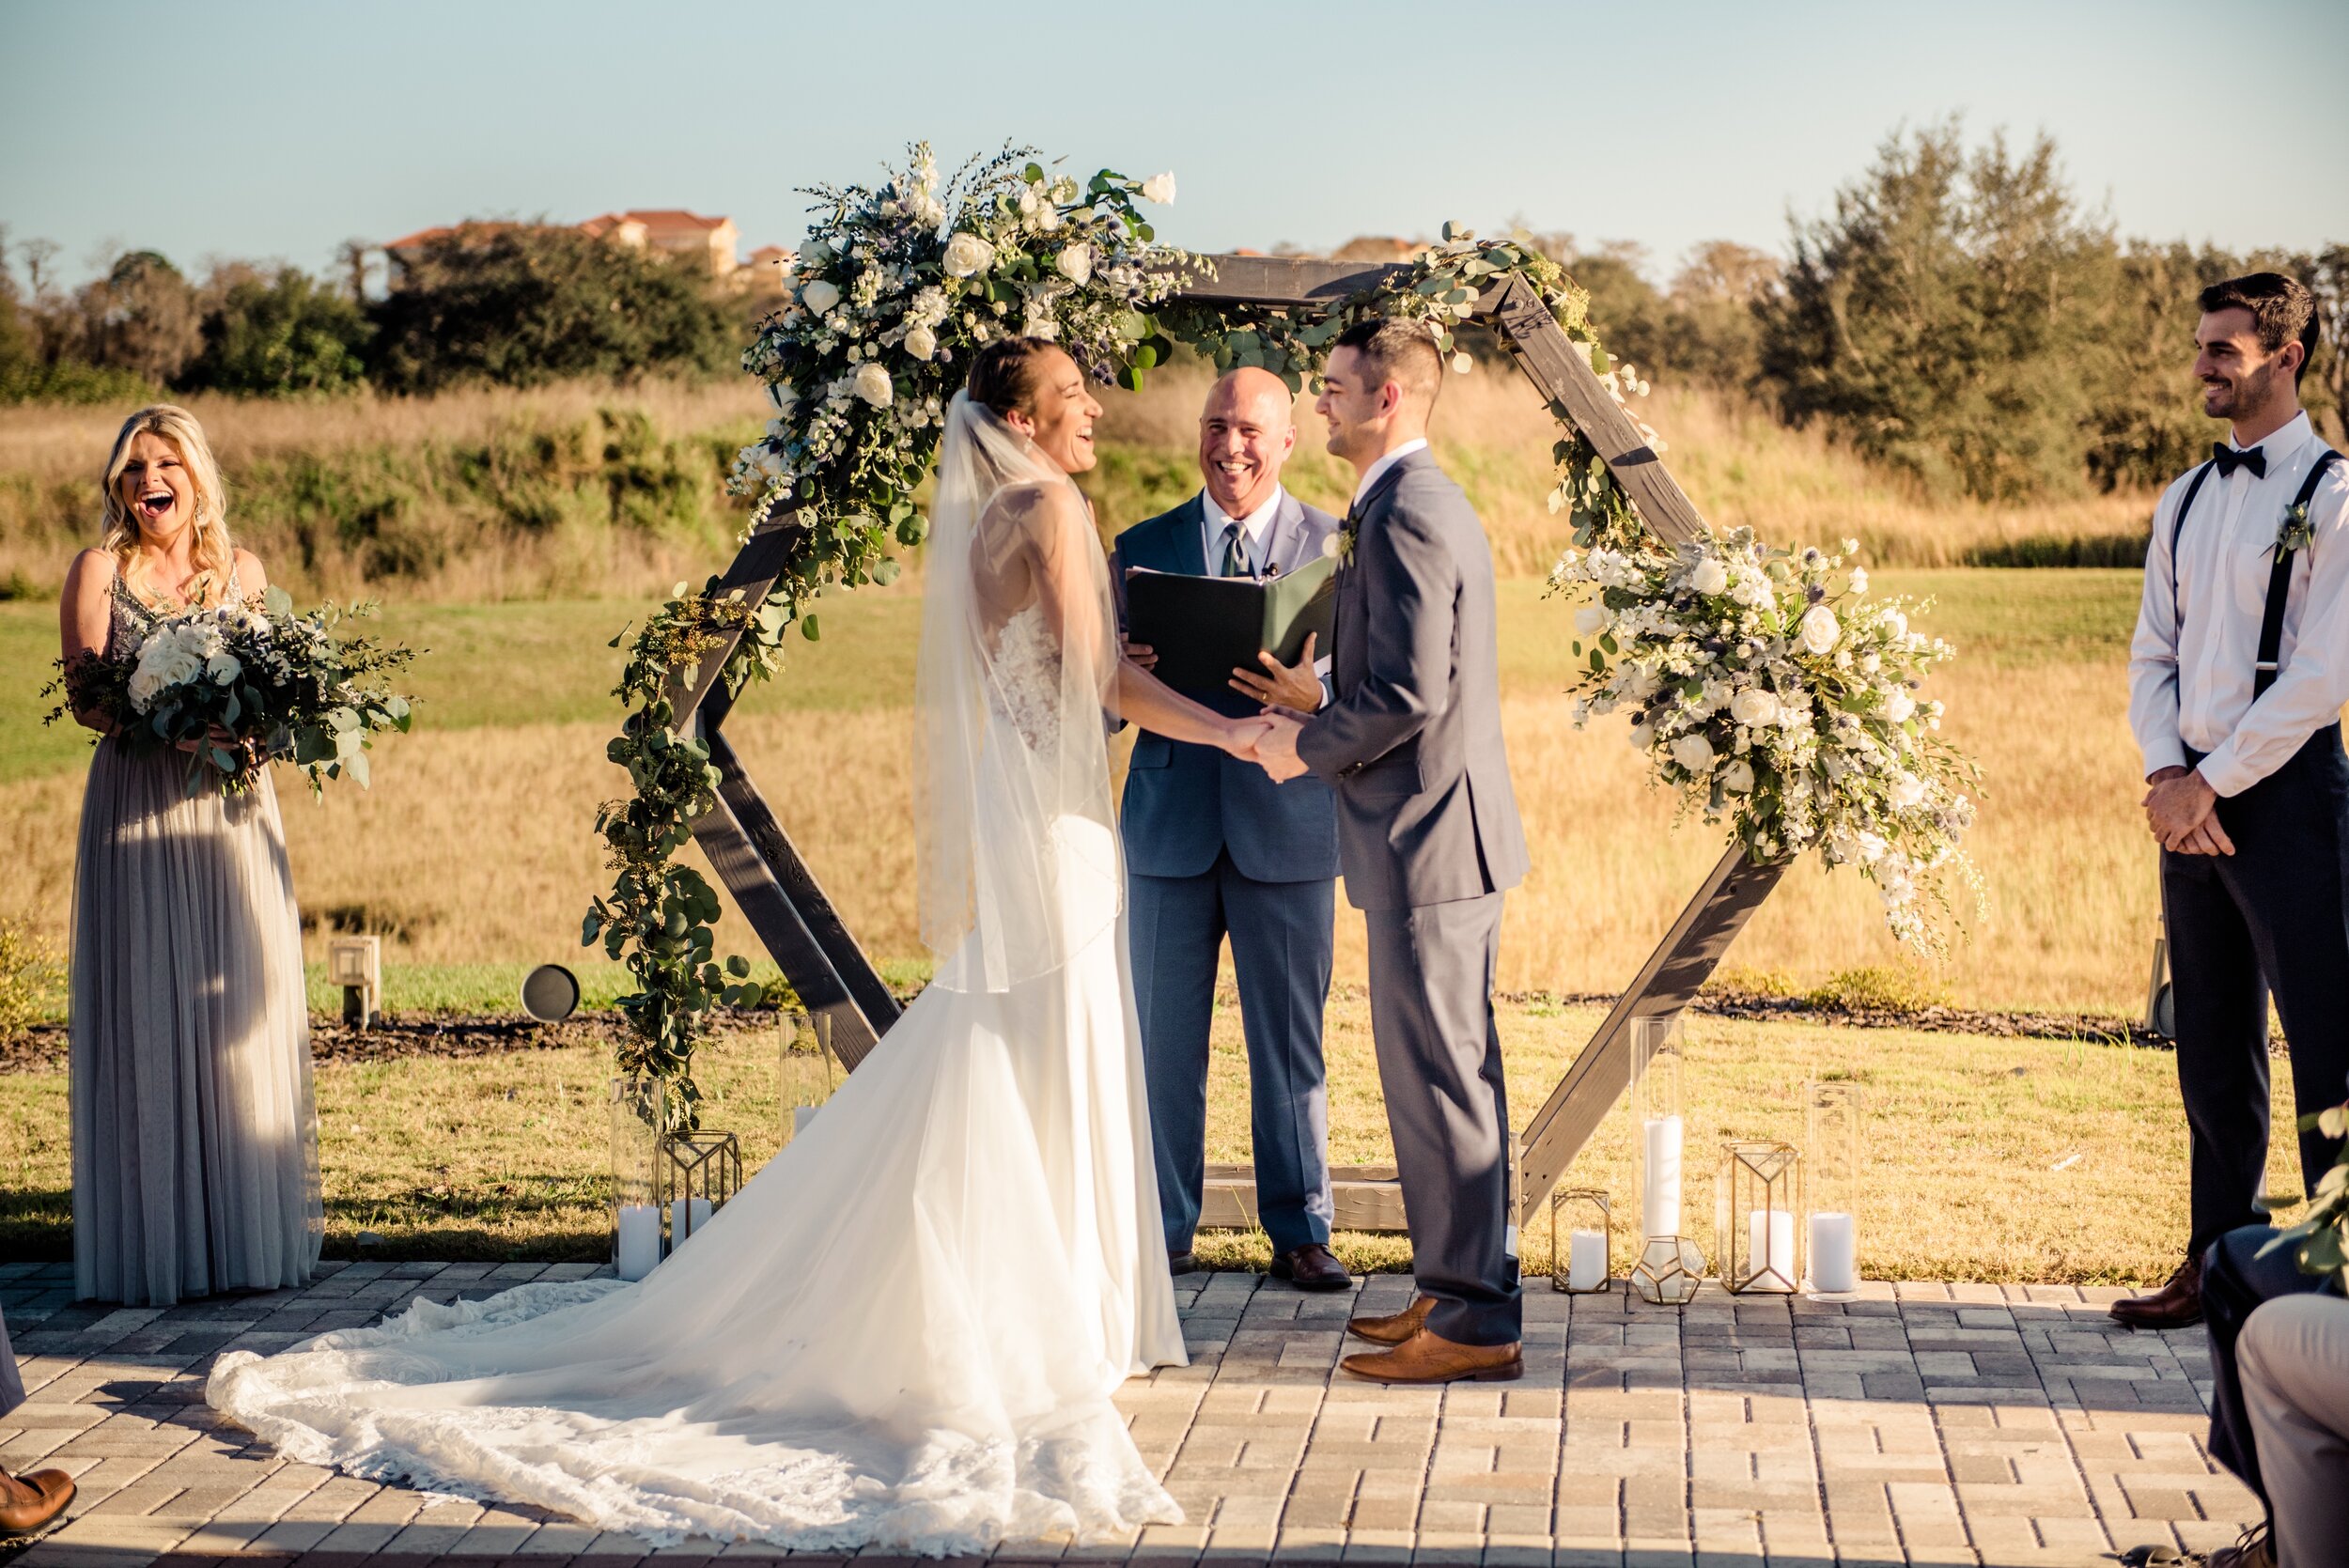 The bride and groom in front of the hexagon wooden arch at Formosa with white and green floral and geometric vases